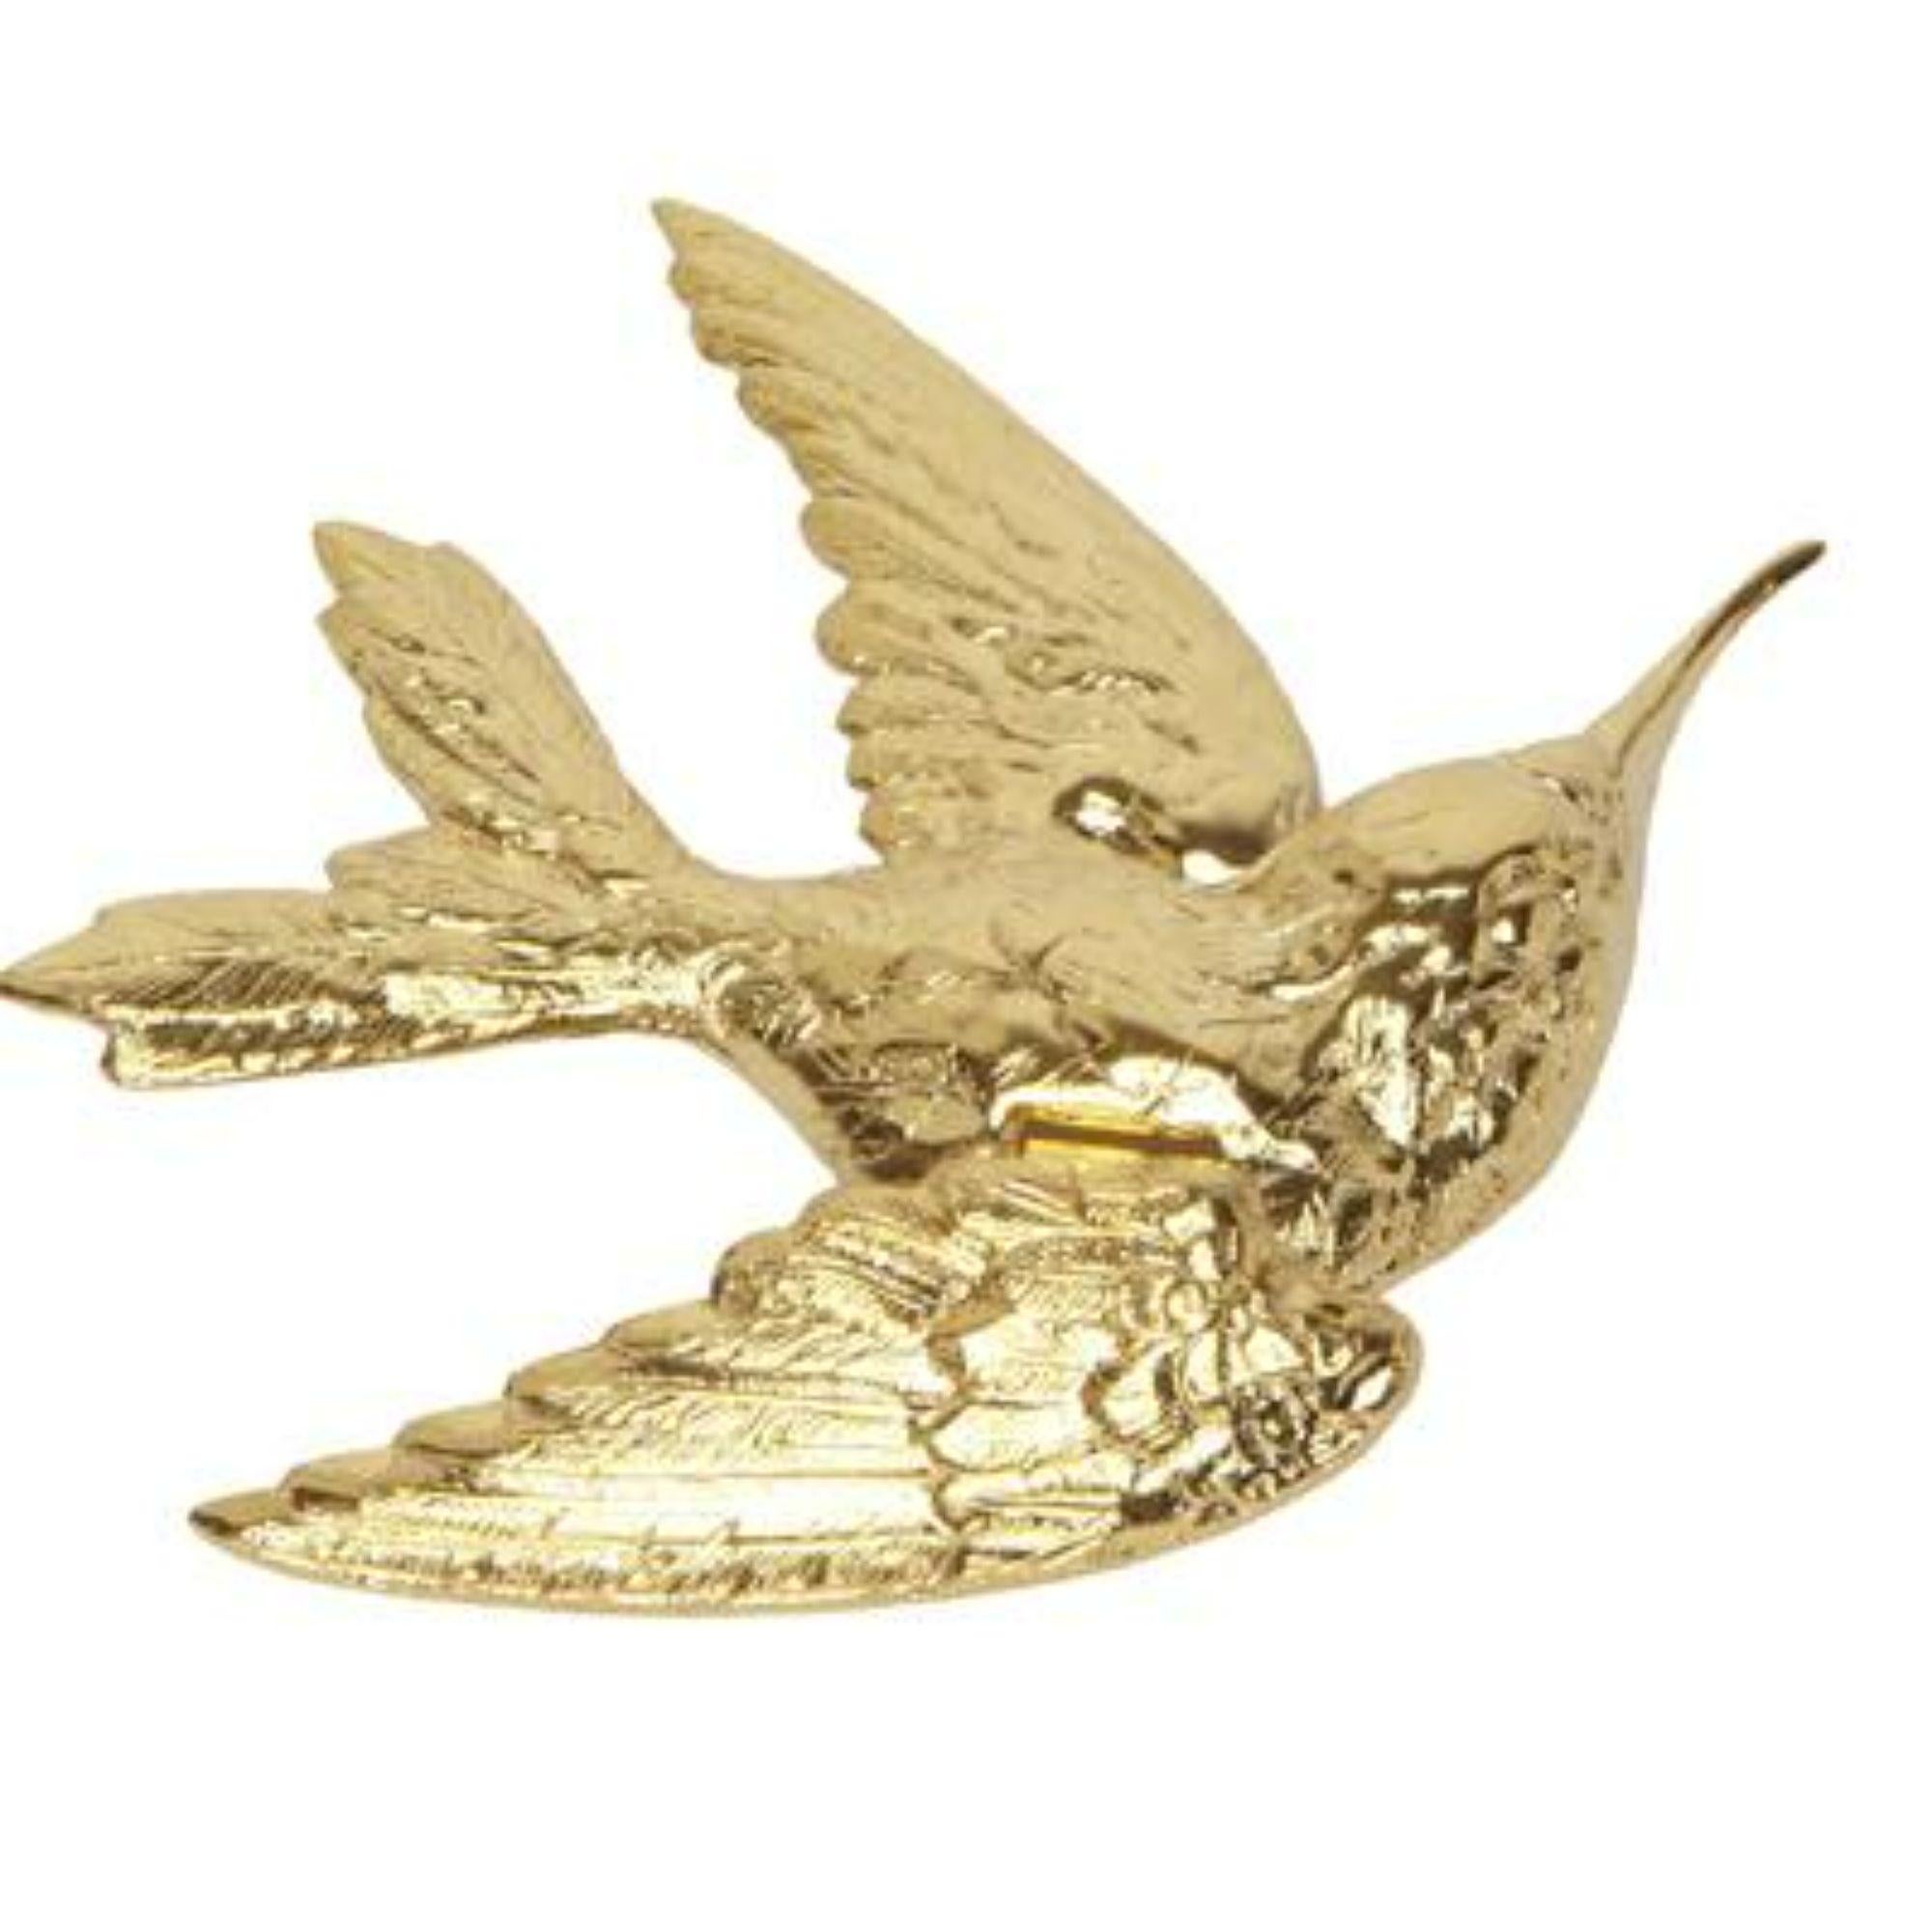 Stunning hummingbird ring with moving wing! It’s a unique cocktail size ring to capture everyone’s attention and lift your spirits. Made in America. 24k gold plated on Brass.

The hummingbird generally symbolizes joy and playfulness, as well as